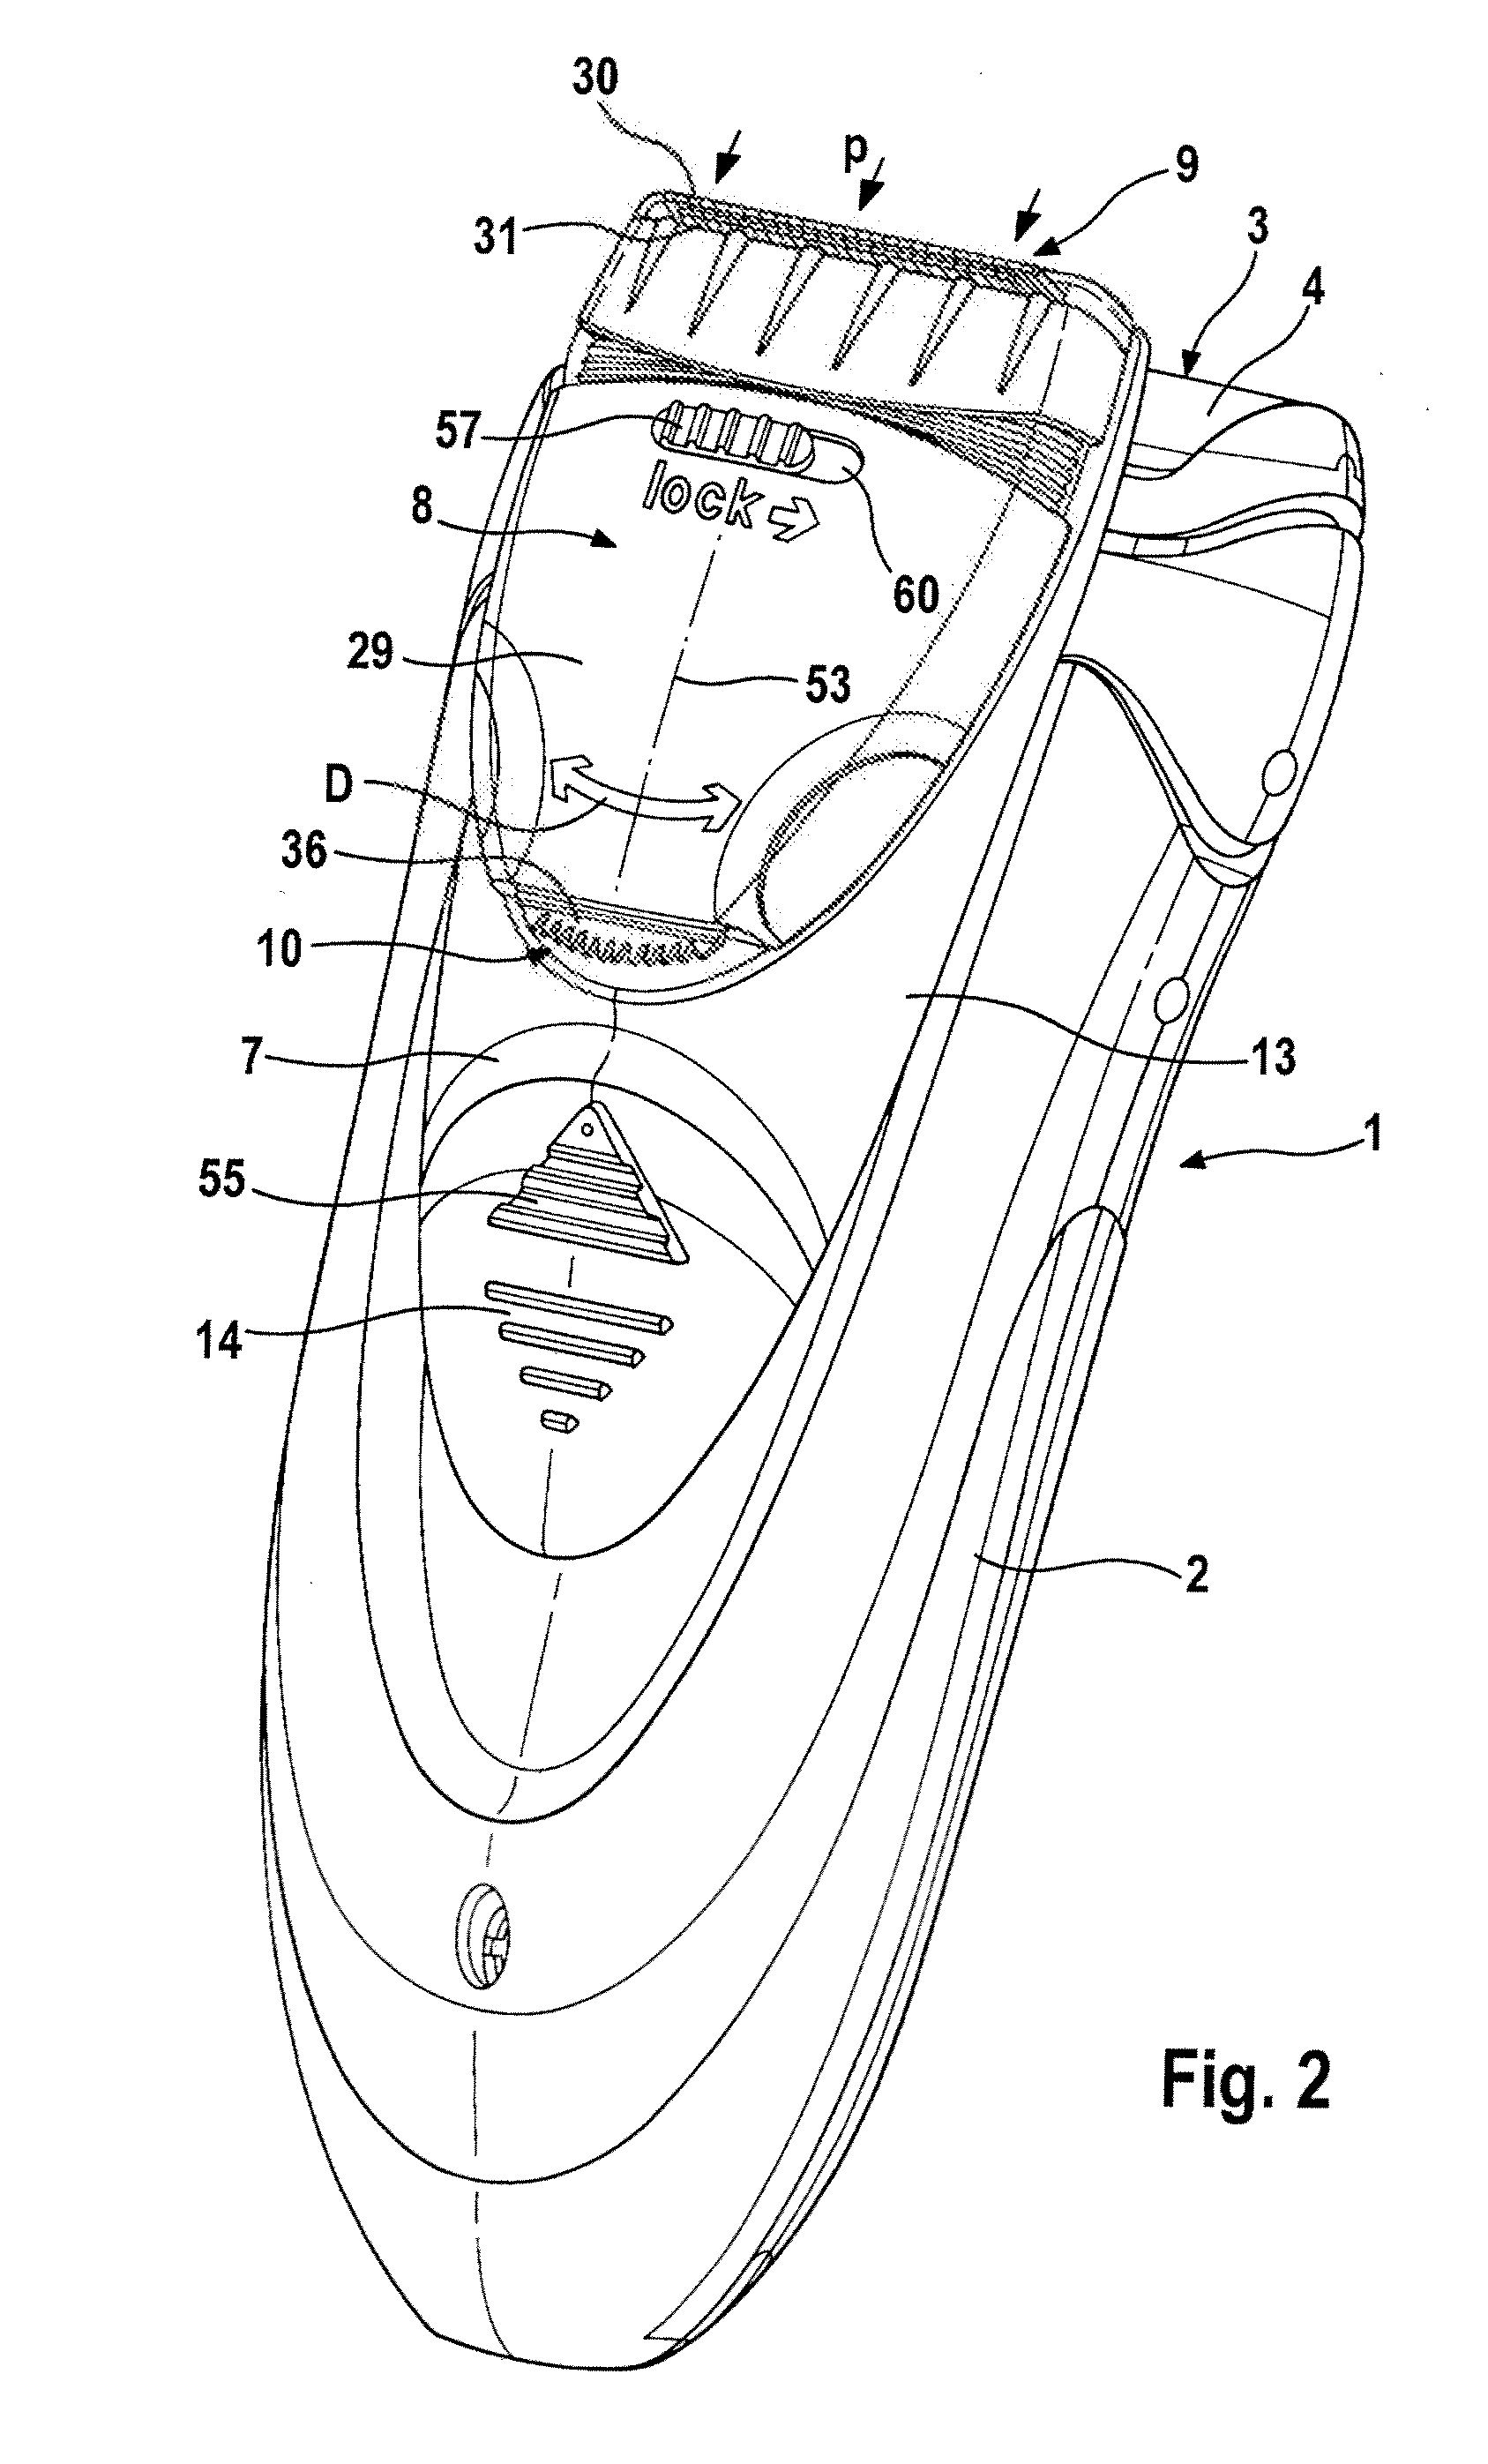 Electrically Operated Hair Cutting Device